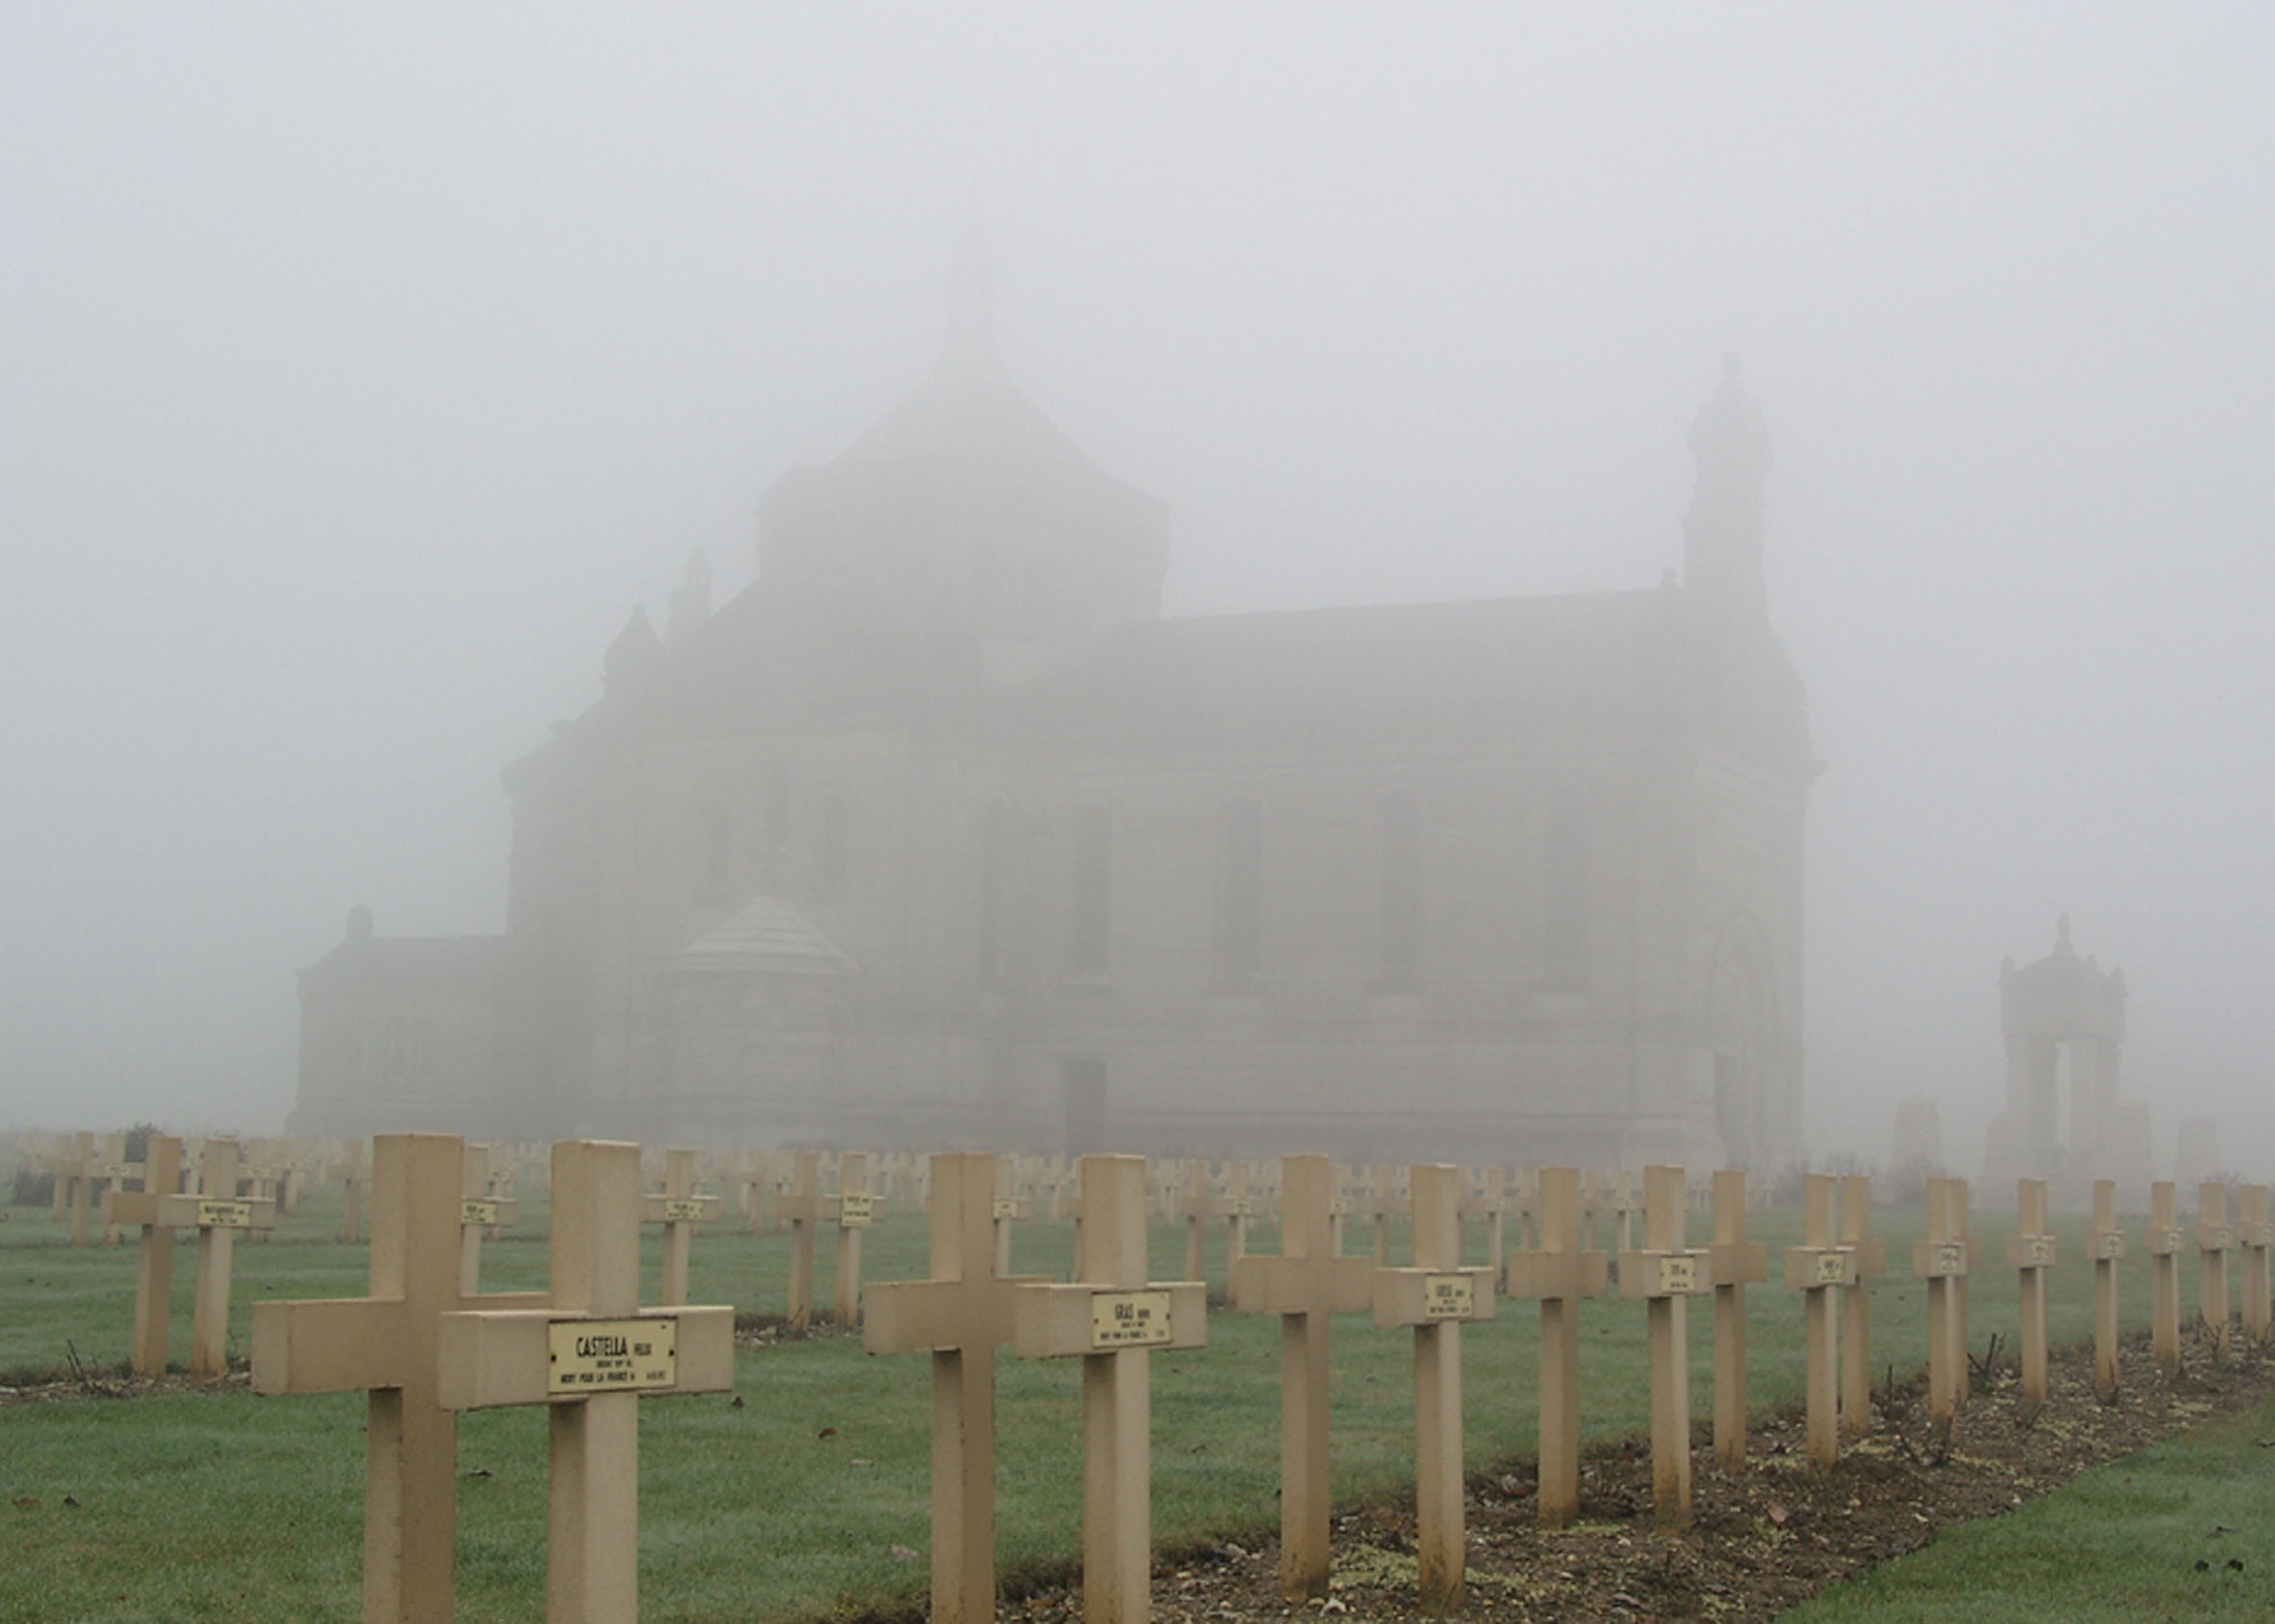 Basilica on top of the Lorette Hill in the Middle of the French Military Cemetery